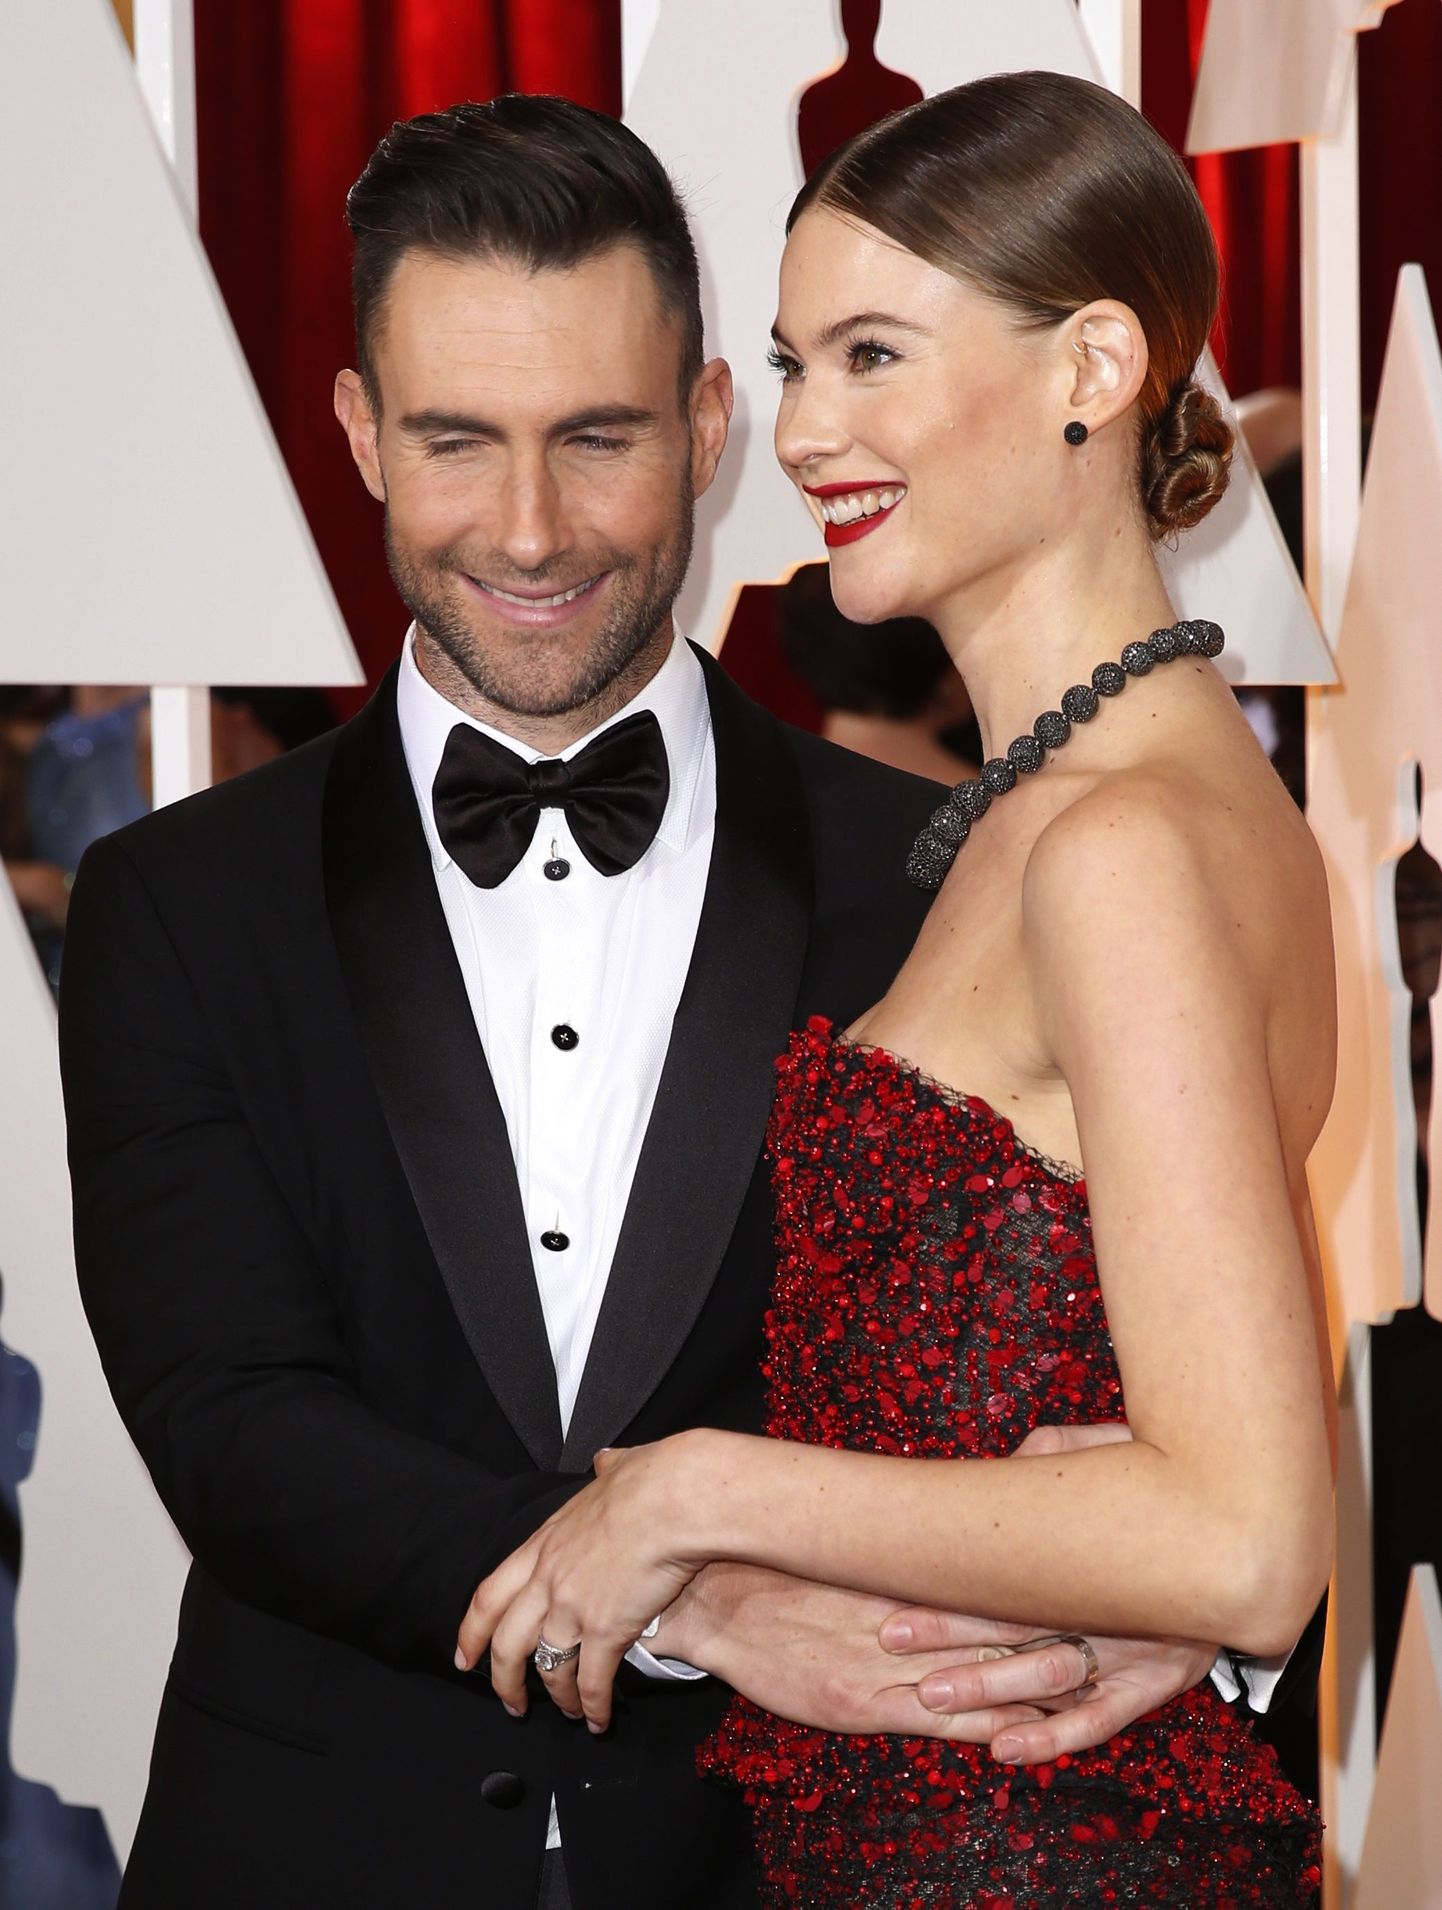 Singer Adam Levine and his wife Behati Prinsloo arrive at the 87th Academy Awards in Hollywood, California February 22, 2015. REUTERS/Lucas Jackson (UNITED STATES TAGS:ENTERTAINMENT) (OSCARS-ARRIVALS)